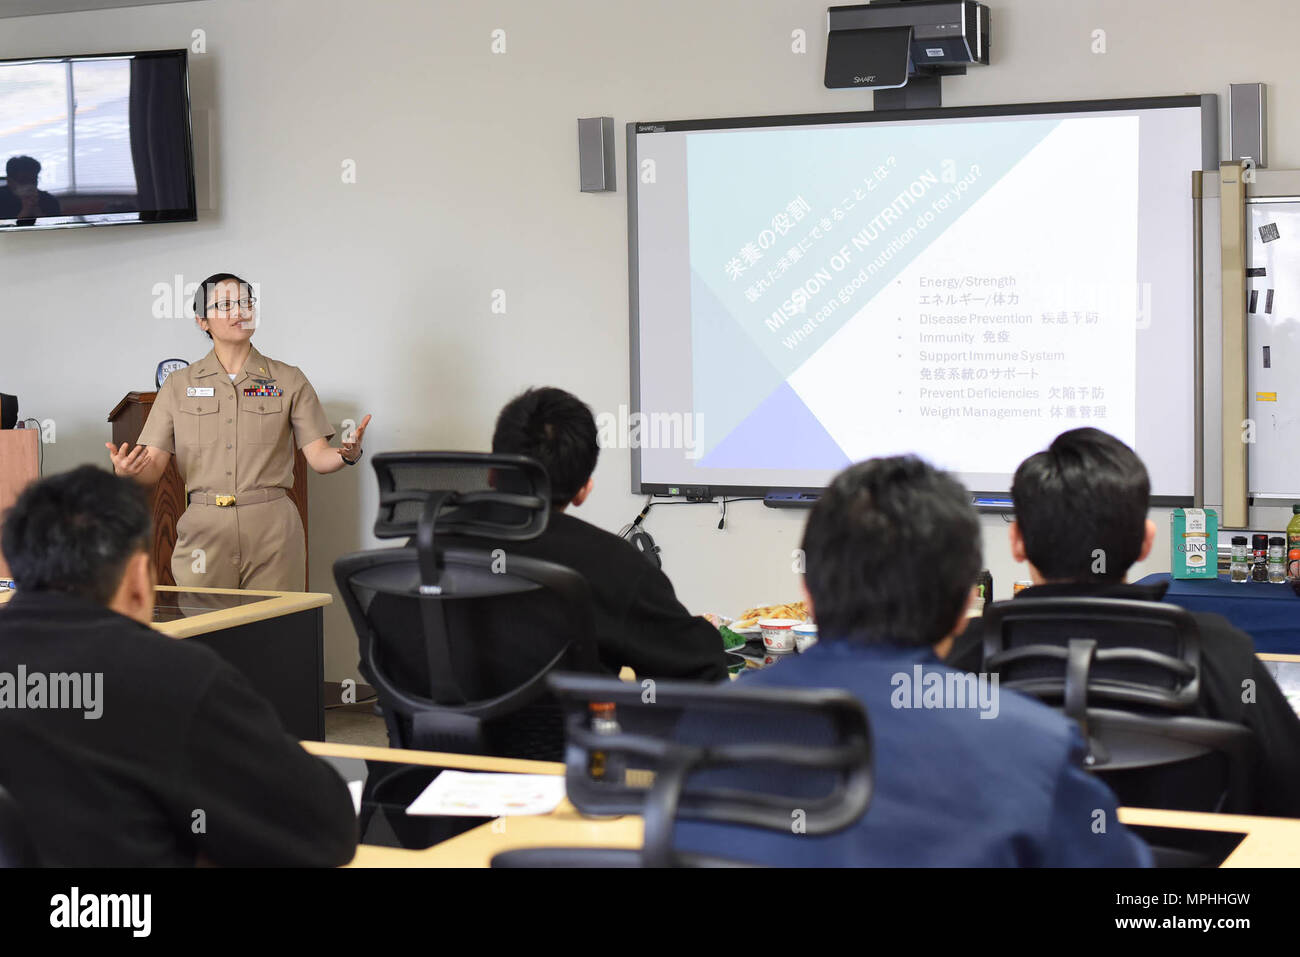 YOKOSUKA, Japan (Mar. 15, 2017) – U.S. Naval Hospital (USNH) Yokosuka Dietitian, Lt.j.g. Mari Moffitt, speaks on health nutrition during a seminar conducted for Japanese staff members of Commander, Navy Region Japan (CNRJ) Fire and Emergency Services, Yokosuka, Mar. 15. The seminar was a collaborative effort between the hospital and local Japanese nutritionists to provide training on proper dieting and weight management. USNH Yokosuka is the largest U.S. military treatment facility on mainland Japan caring for approximately 43,000 eligible beneficiaries. (US Navy photo by USNH Yokosuka PAO/Rel Stock Photo